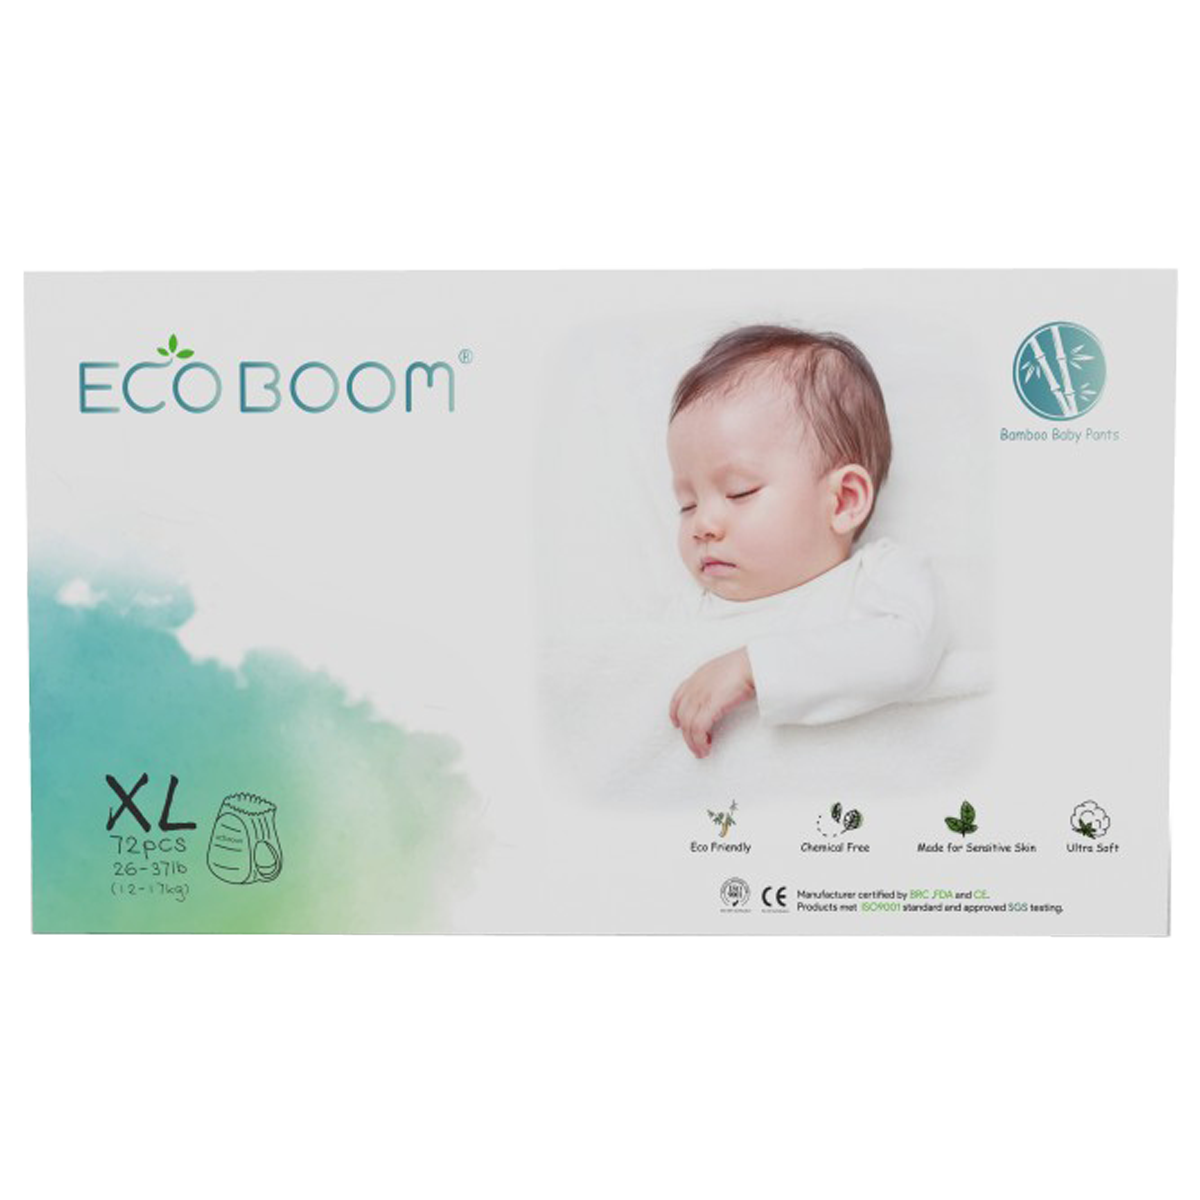 XL Pants Bamboo Eco Boom Eco Friendly Biodegradable Disposable Diapers for Babies 26 to 37 pounds, 72 pcs